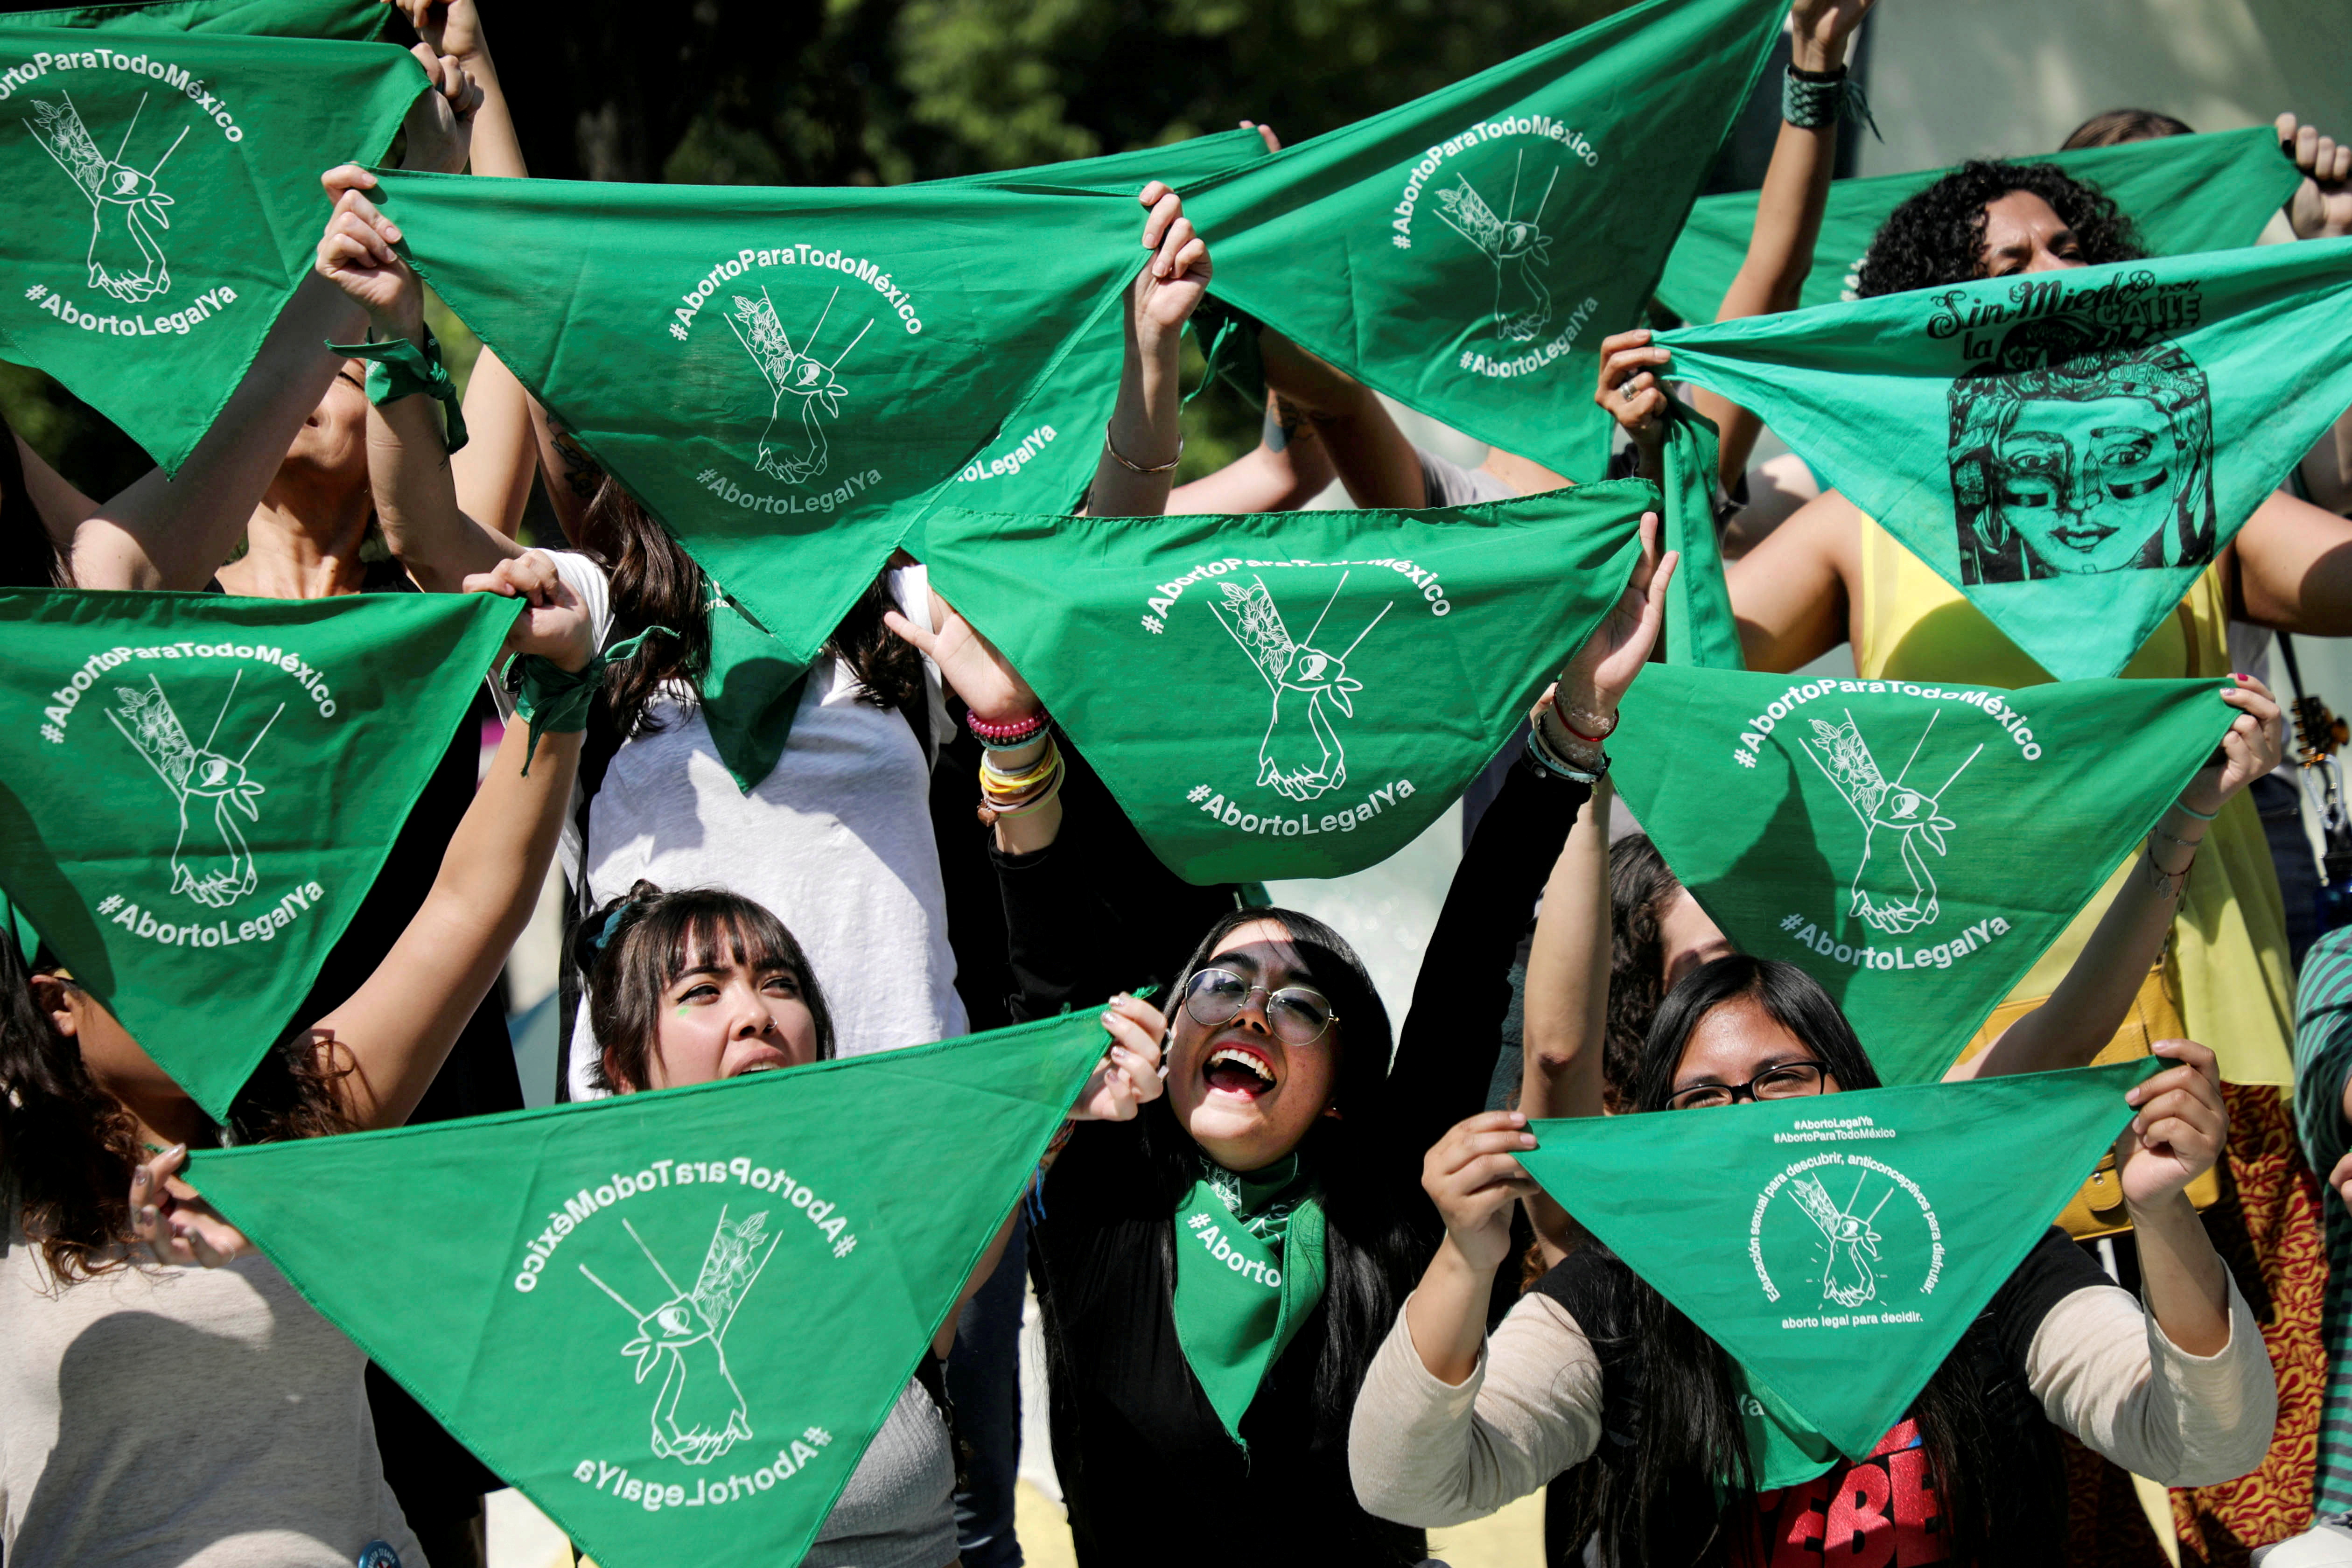 Women hold green handkerchiefs during a protest in support of legal and safe abortion in Mexico City, Mexico, February 19, 2020. REUTERS/Edgard Garrido/File Photo